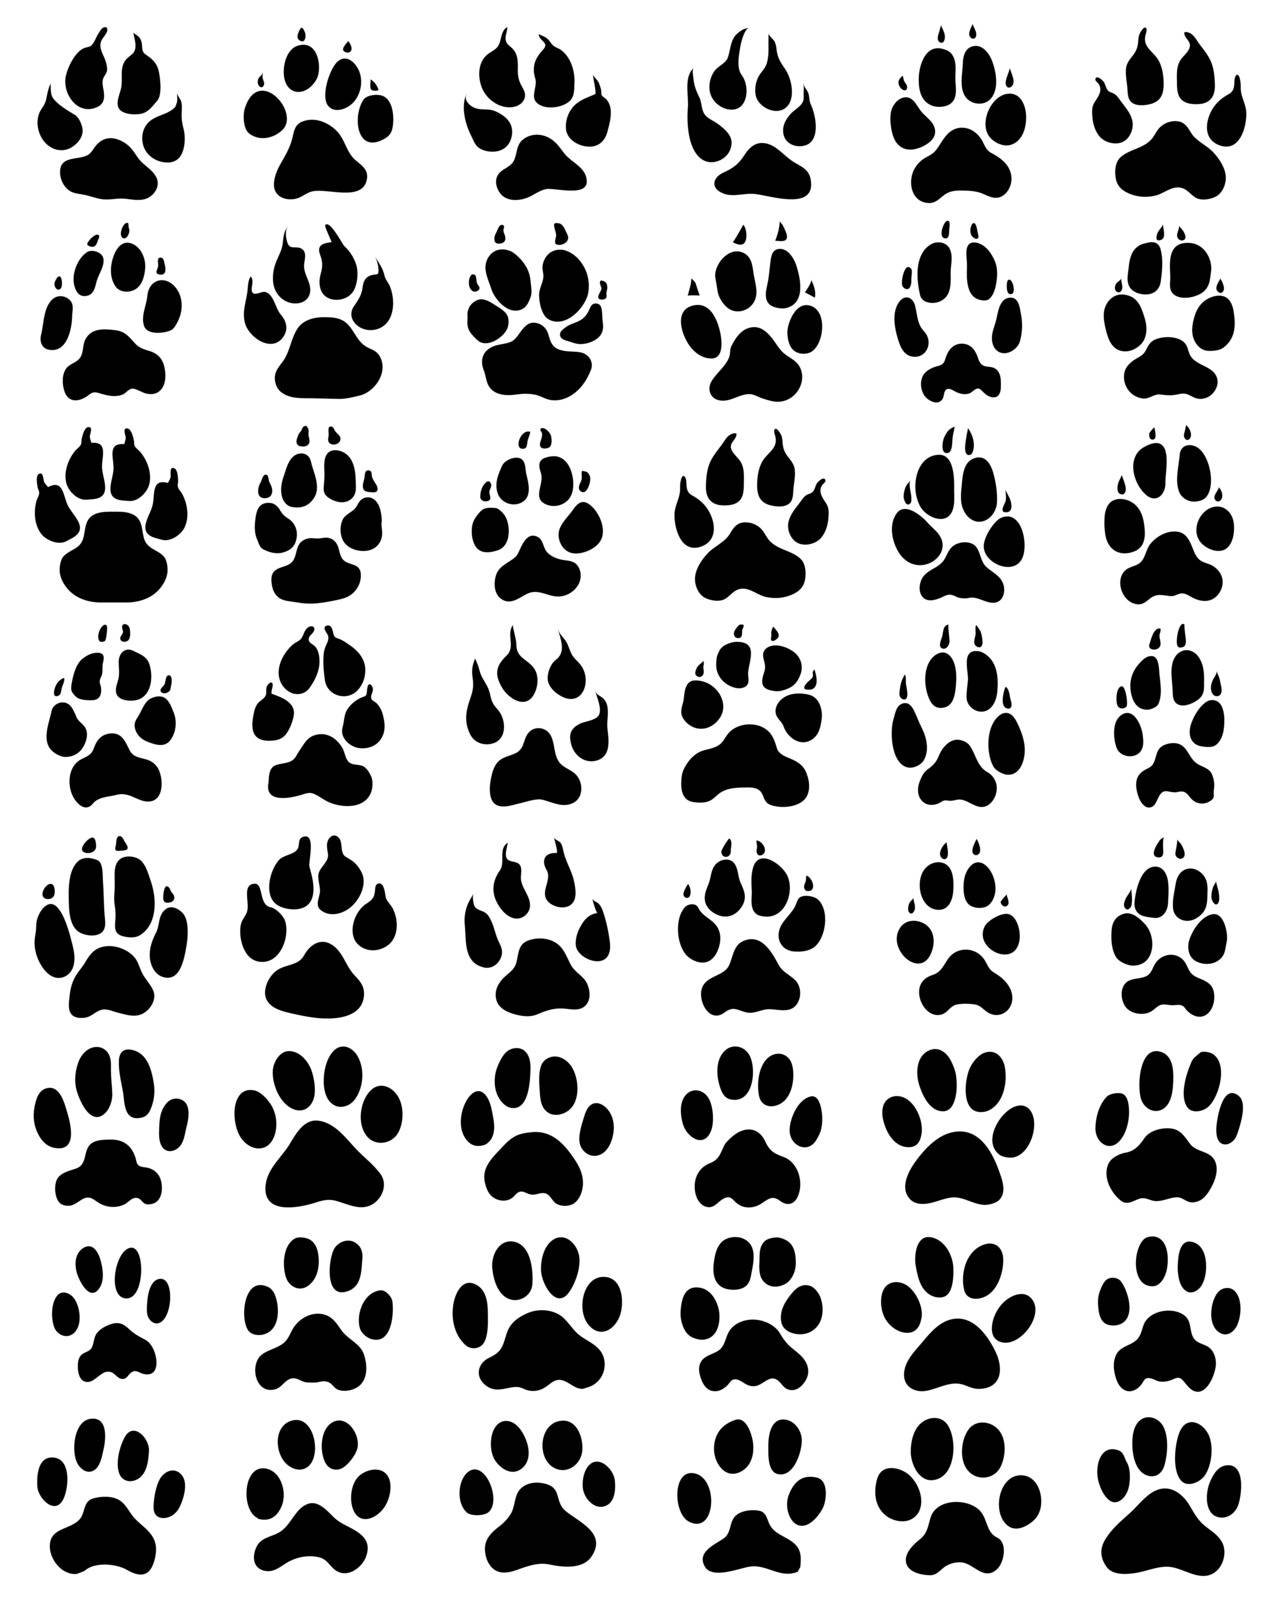 Black print of paws of dogs and cats on white background